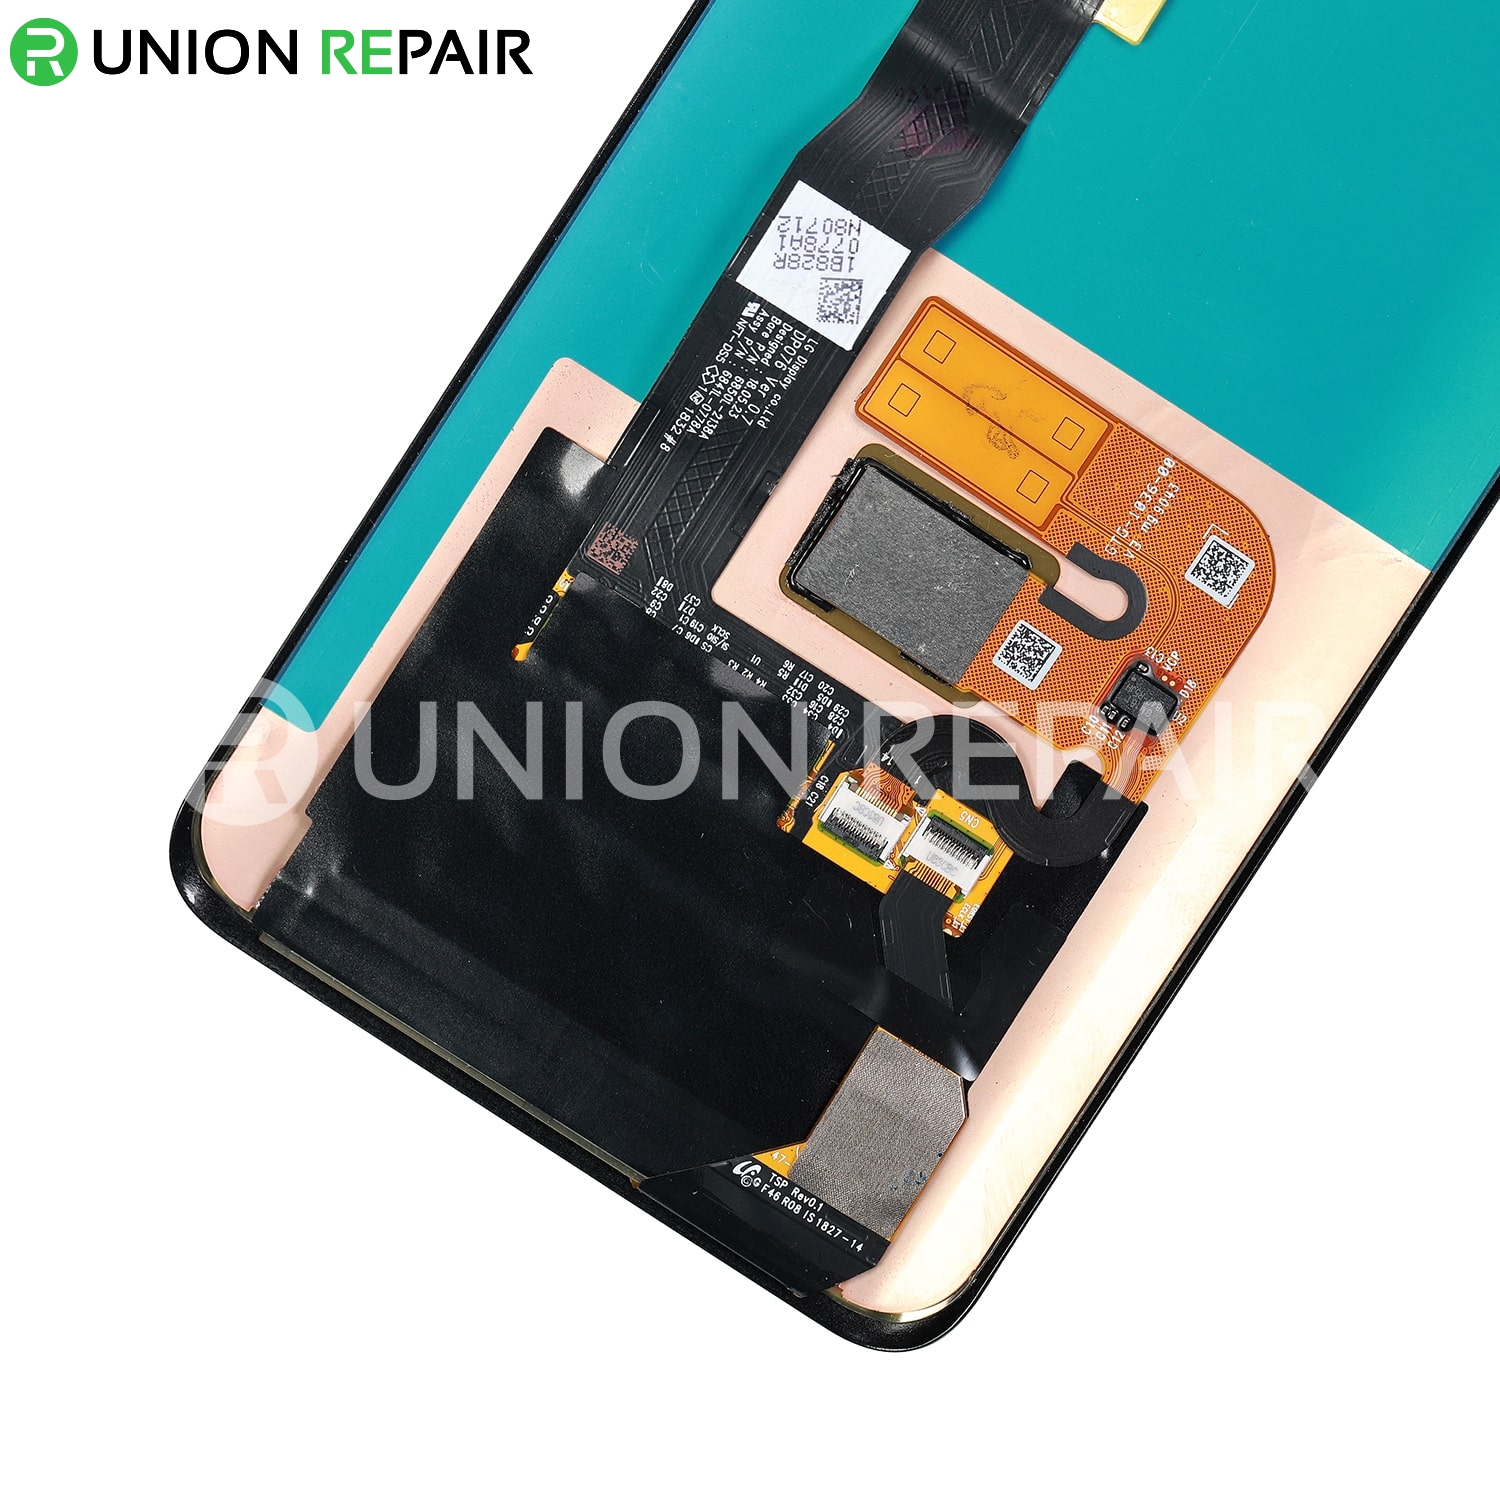 Replacement For Huawei Mate 20 Pro LCD with Digitizer Assembly - Black